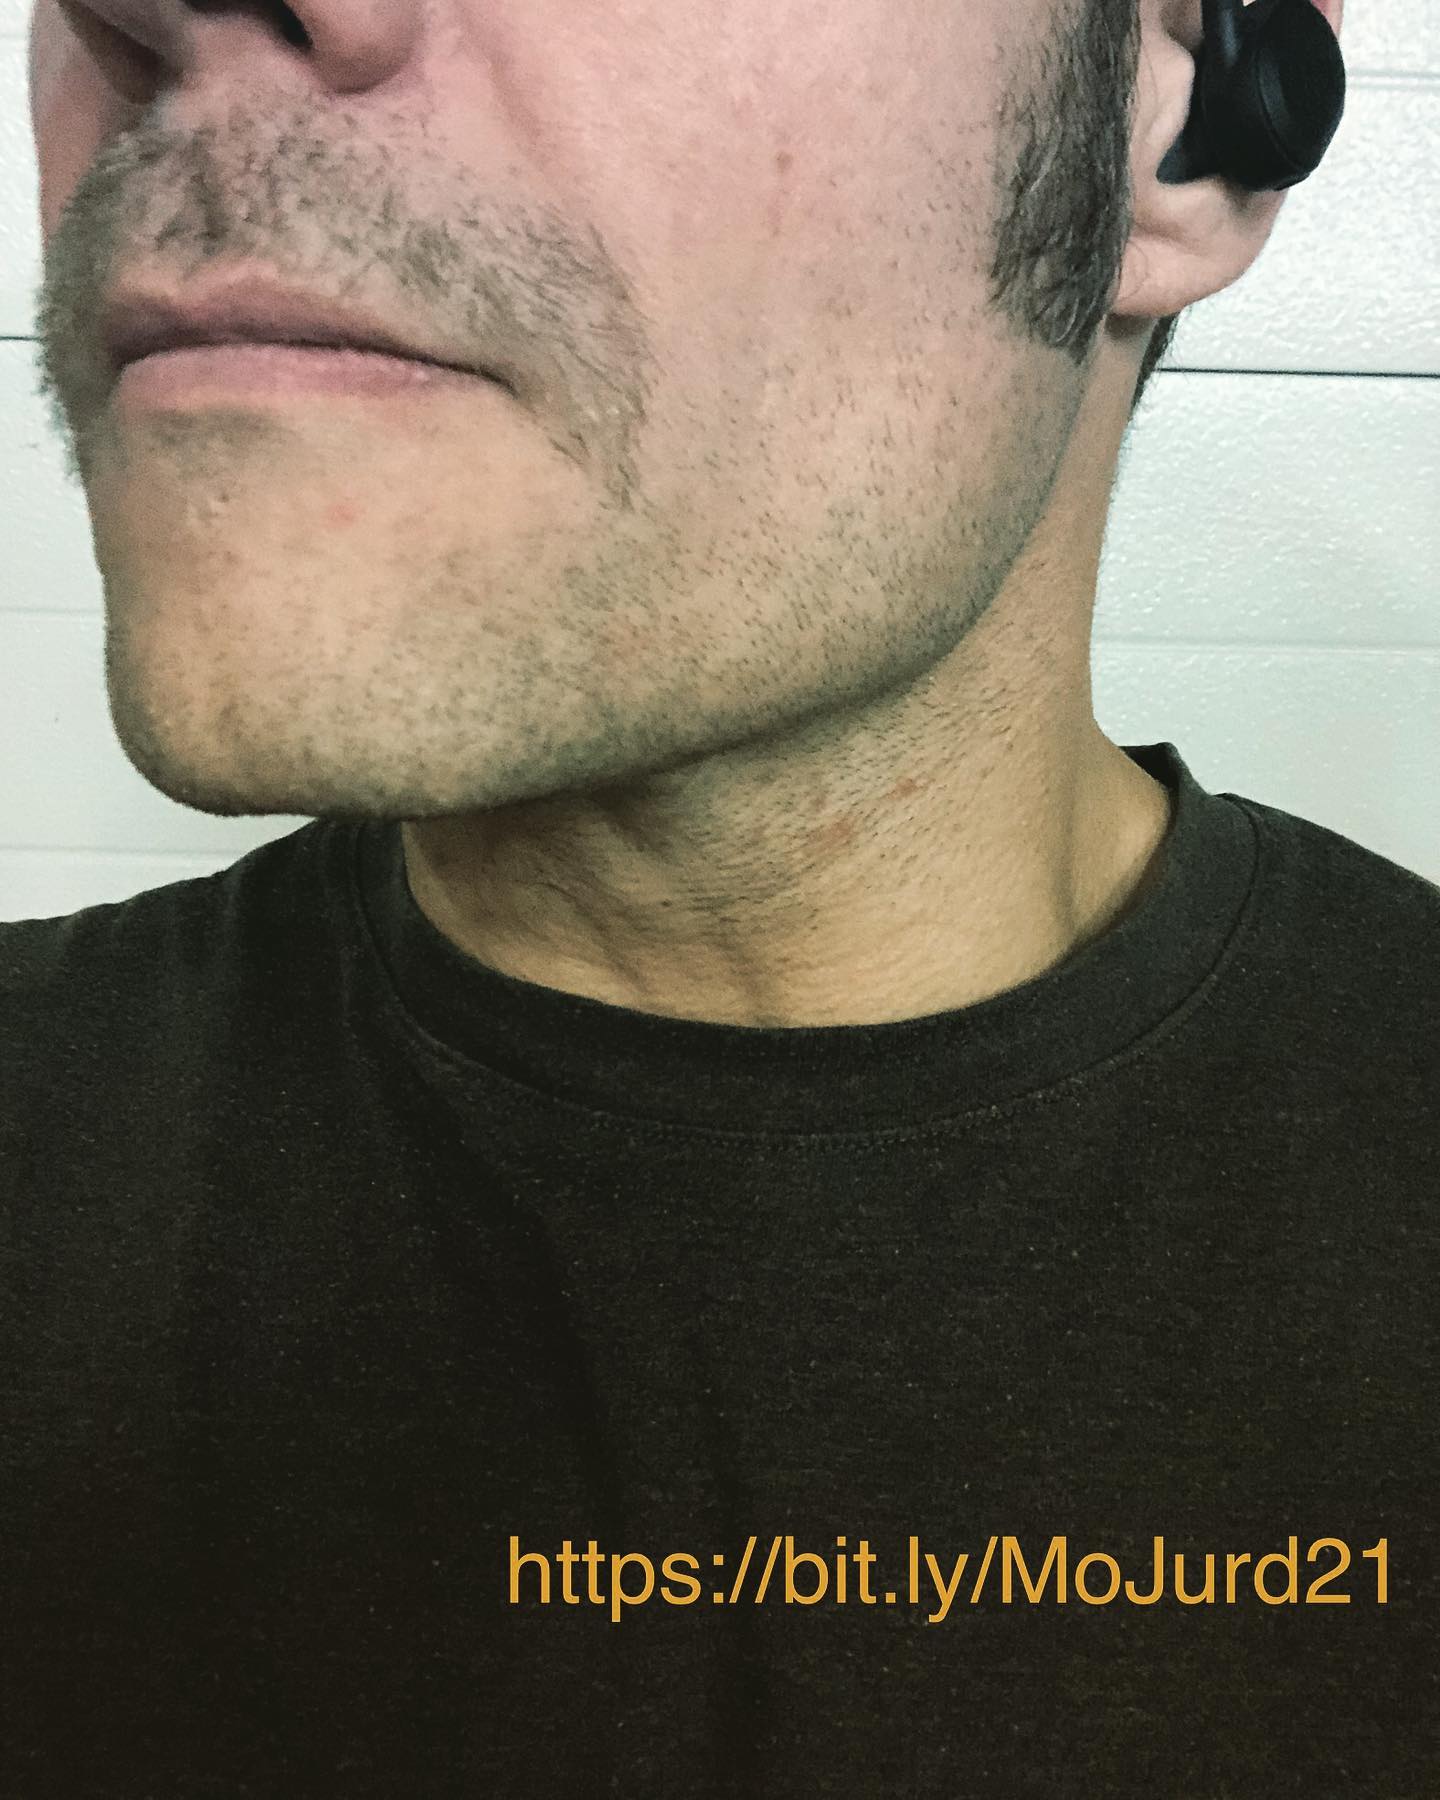 This shadow of a moustache, much like your donation to fight cancer, represents a promising future. bit.ly/MoJurd21